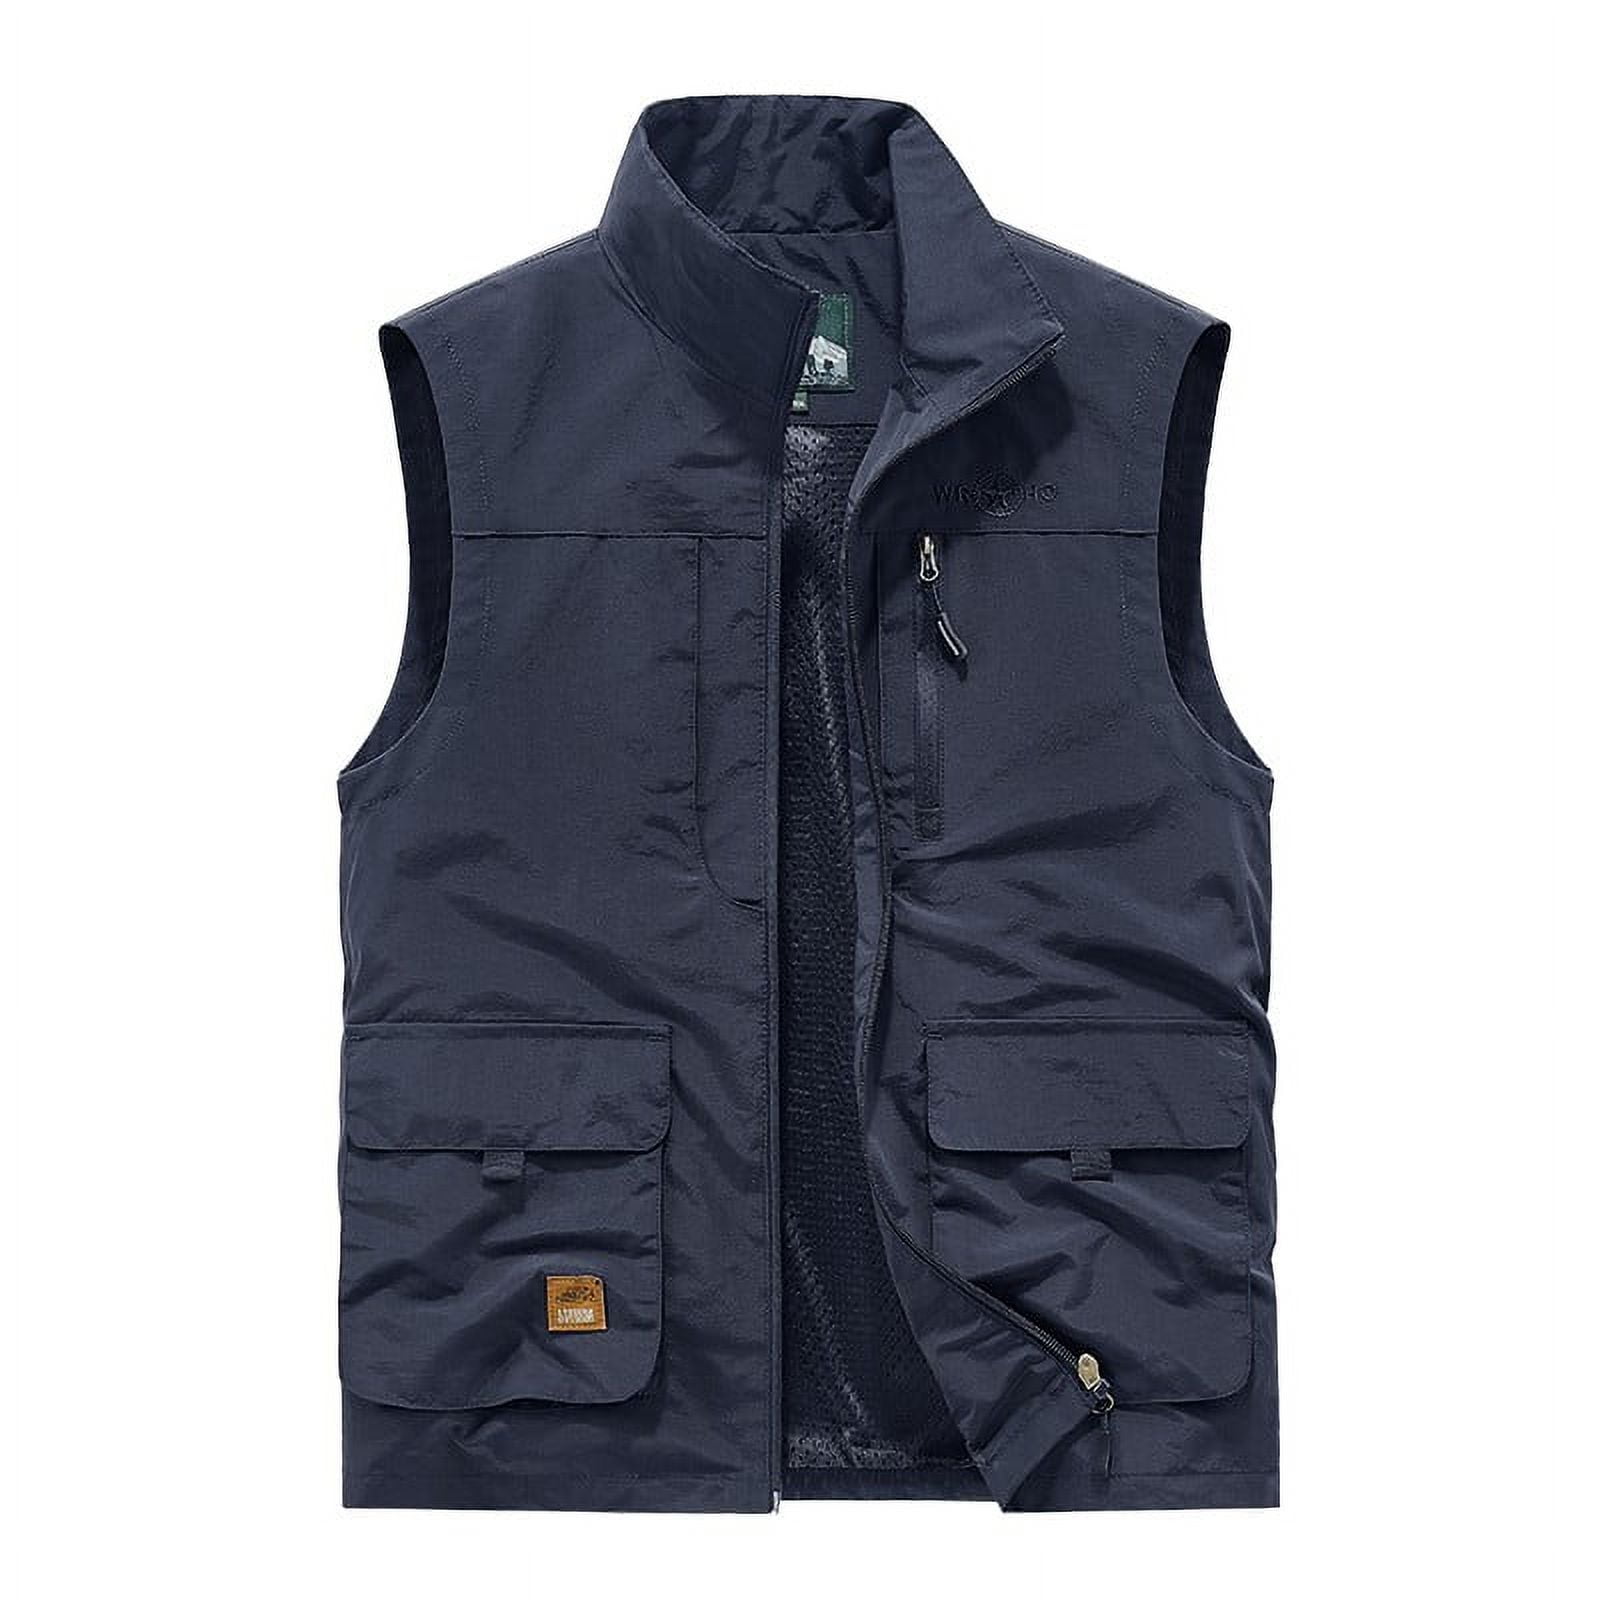 YYDGH Men's Outdoor Fishing Vest Casual Work Cargo Vests Lightweight  Waistcoat Vest with Pockets Fall Photography Tour Coats 